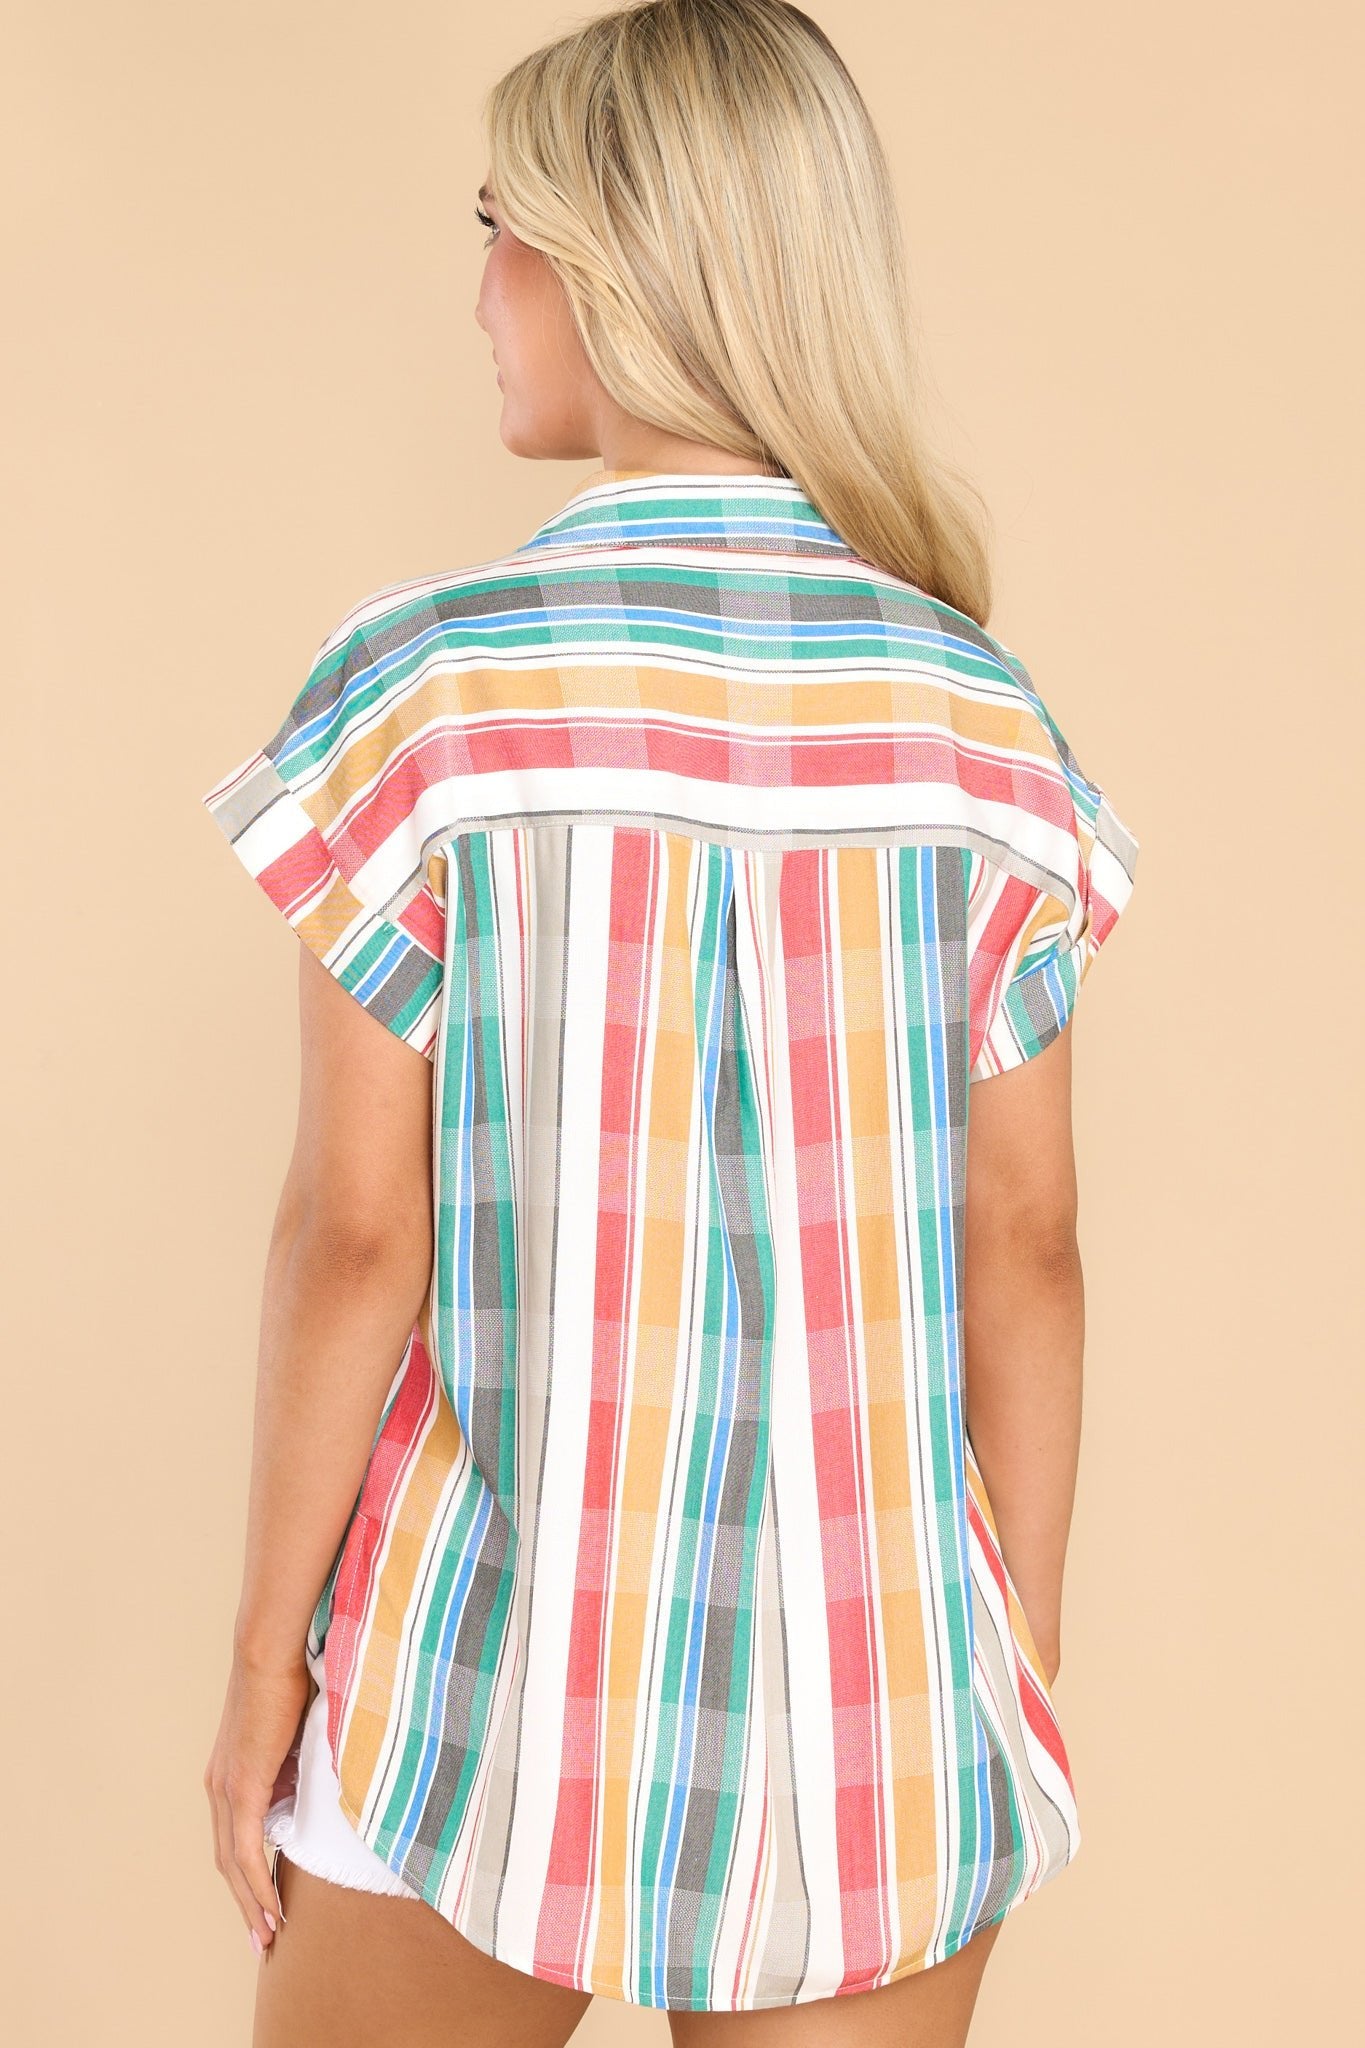 Back view of this top that features a collared neckline, functional buttons down the bodice, cuffed short sleeves, and one functional breast pocket.